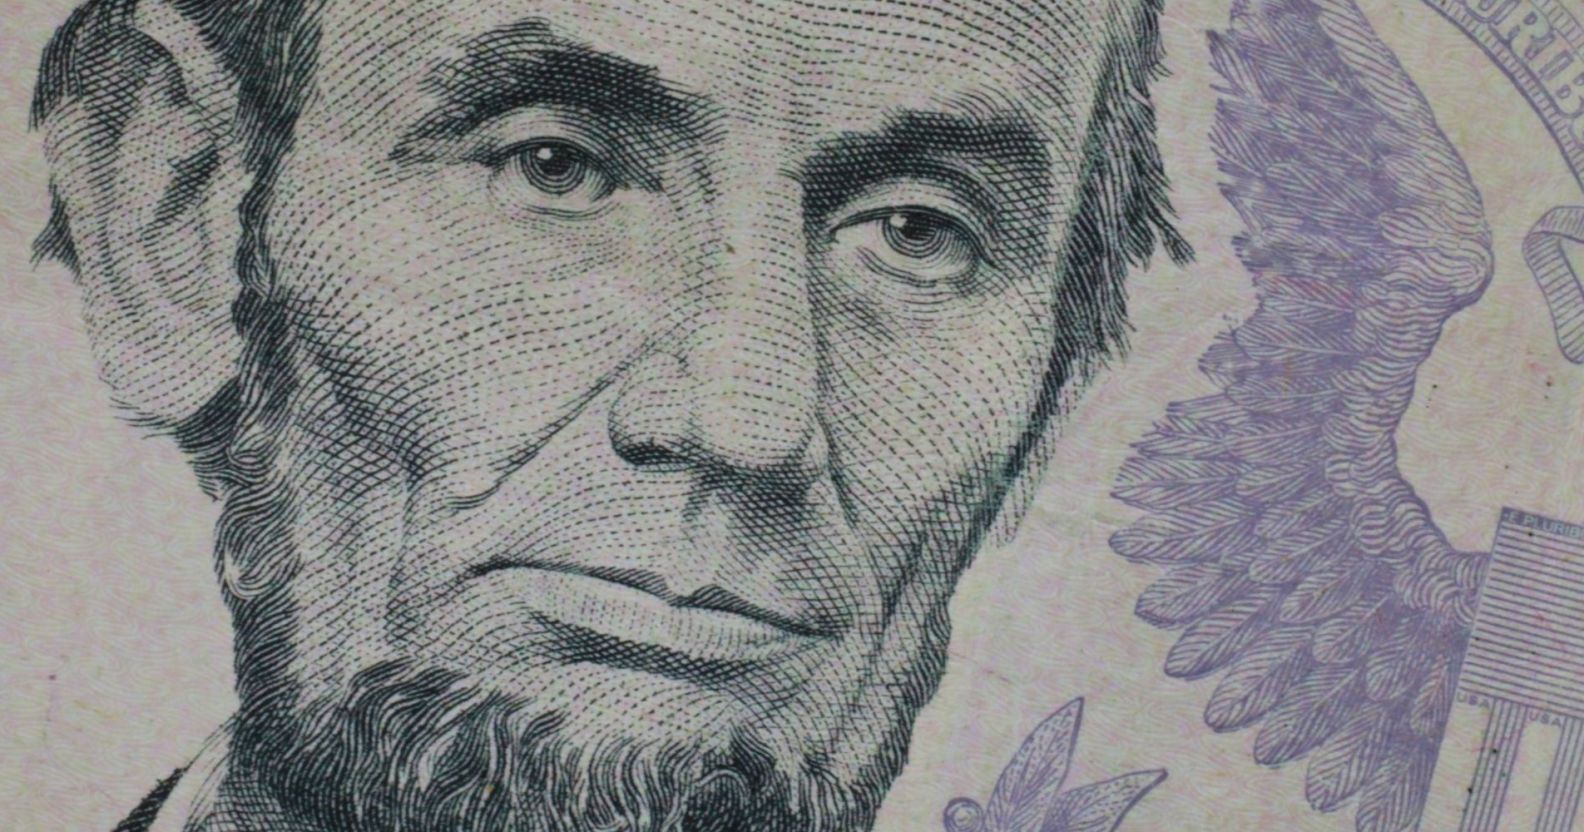 Abraham Lincoln on a US dollar